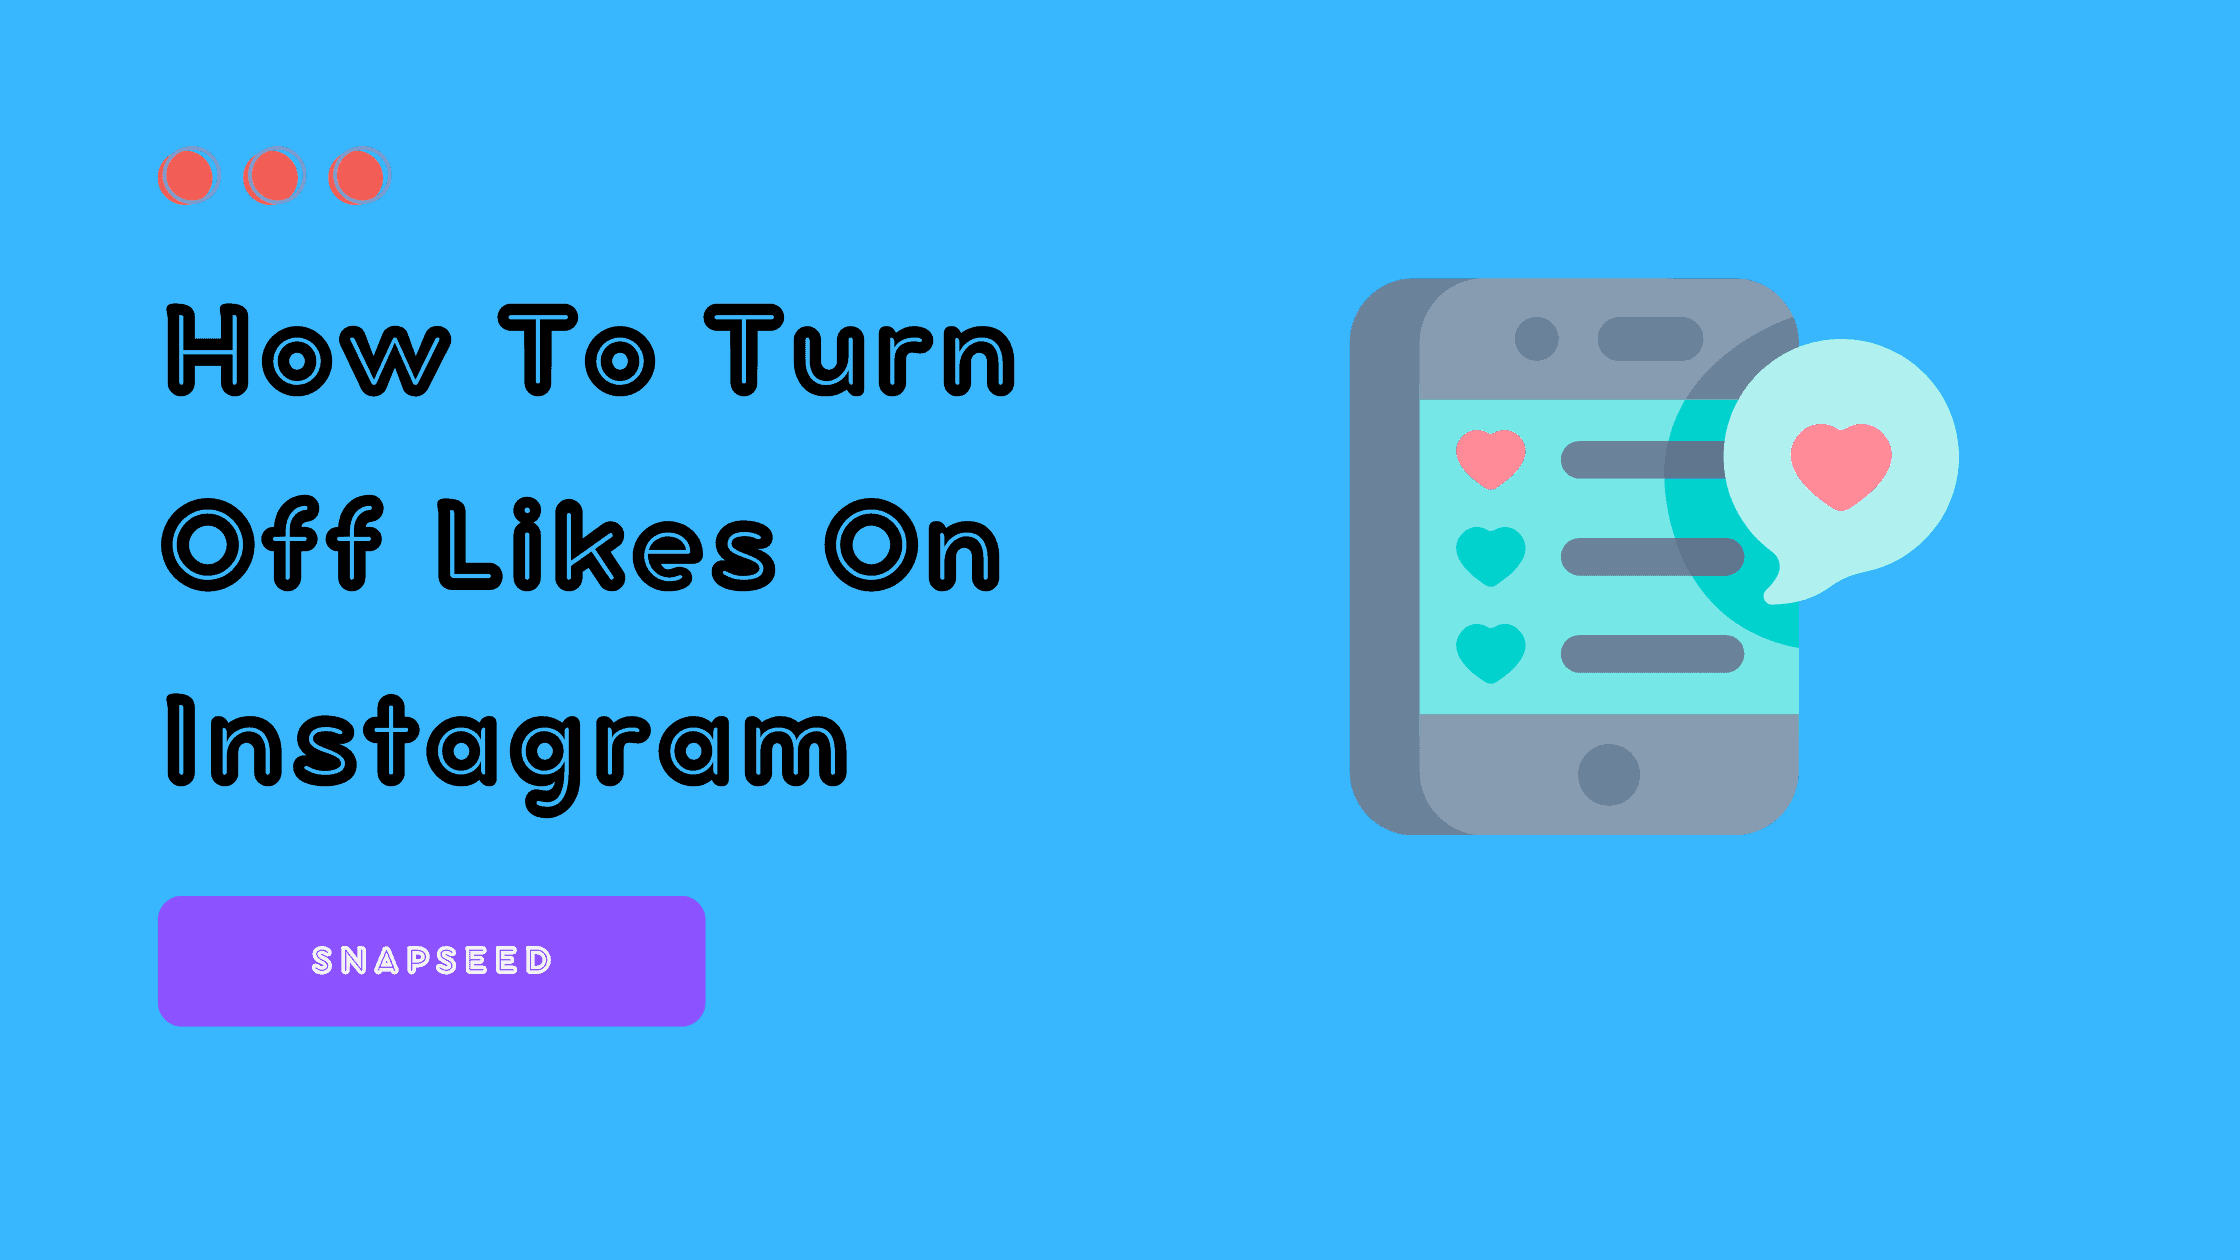 How To Turn Off Likes On Instagram - Snapseed